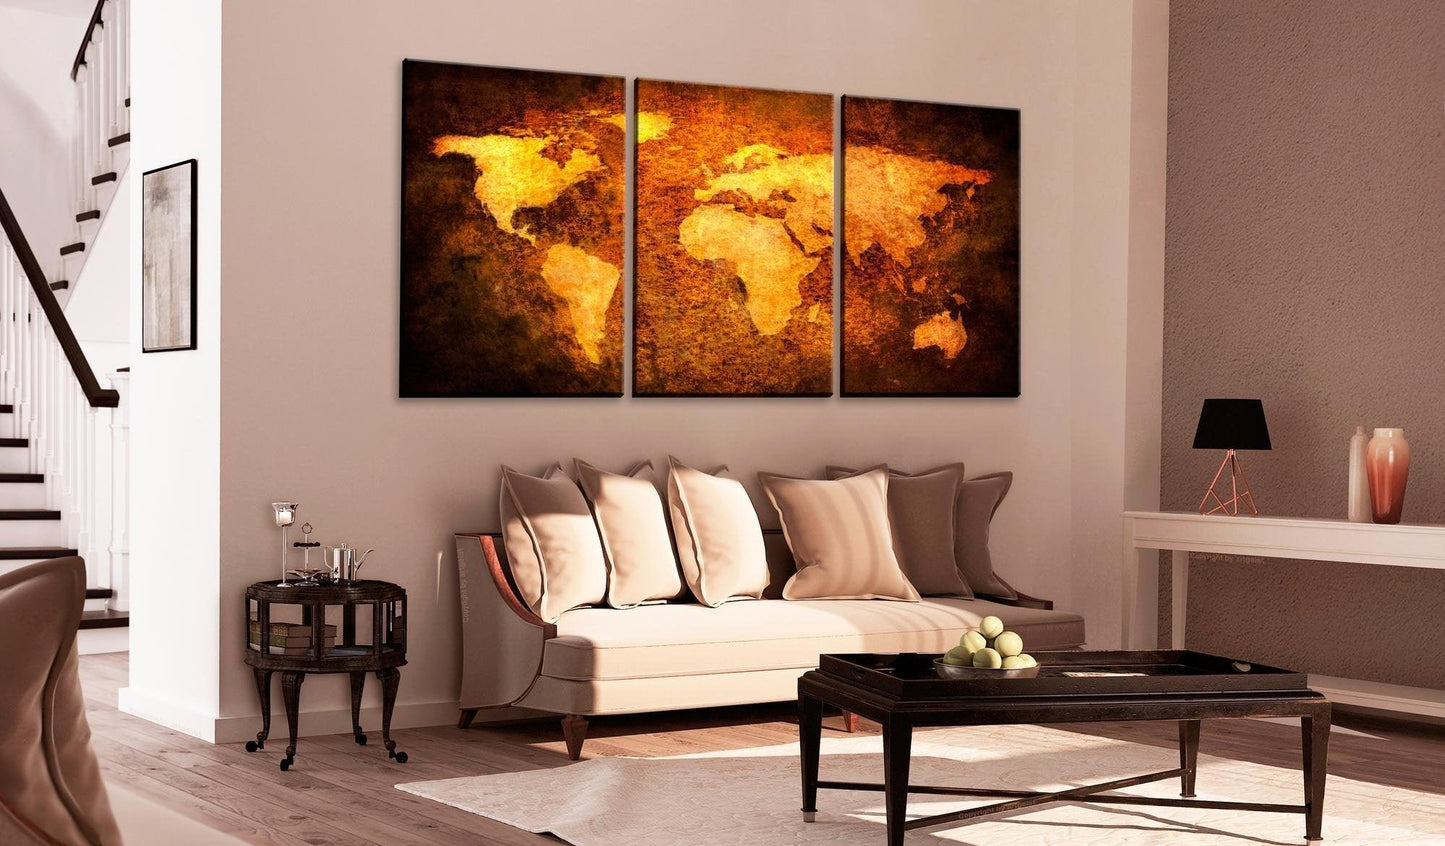 Canvas Print - Rusty continents - www.trendingbestsellers.com